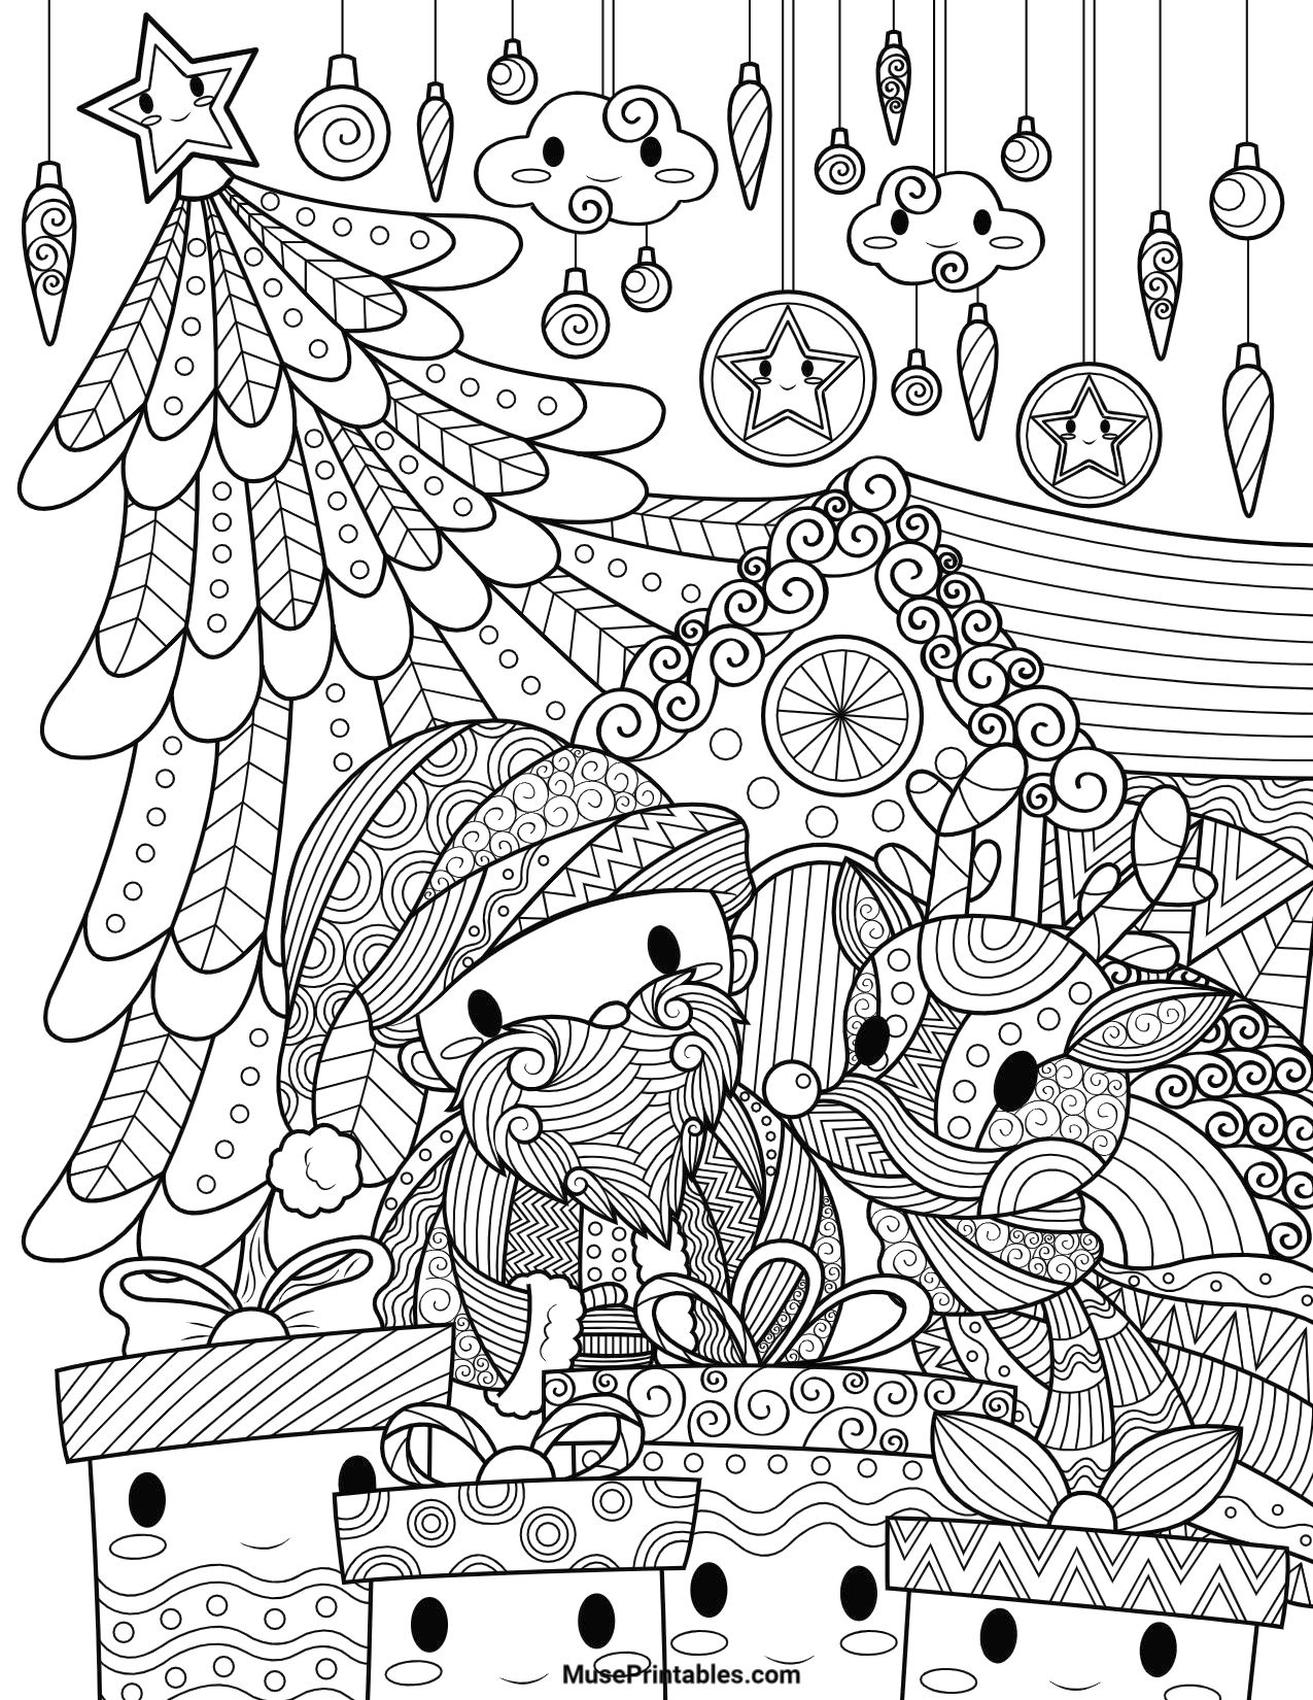 Get This Kawaii Coloring Pages Christmas for Adults Christmas Presents Coloring Sheets